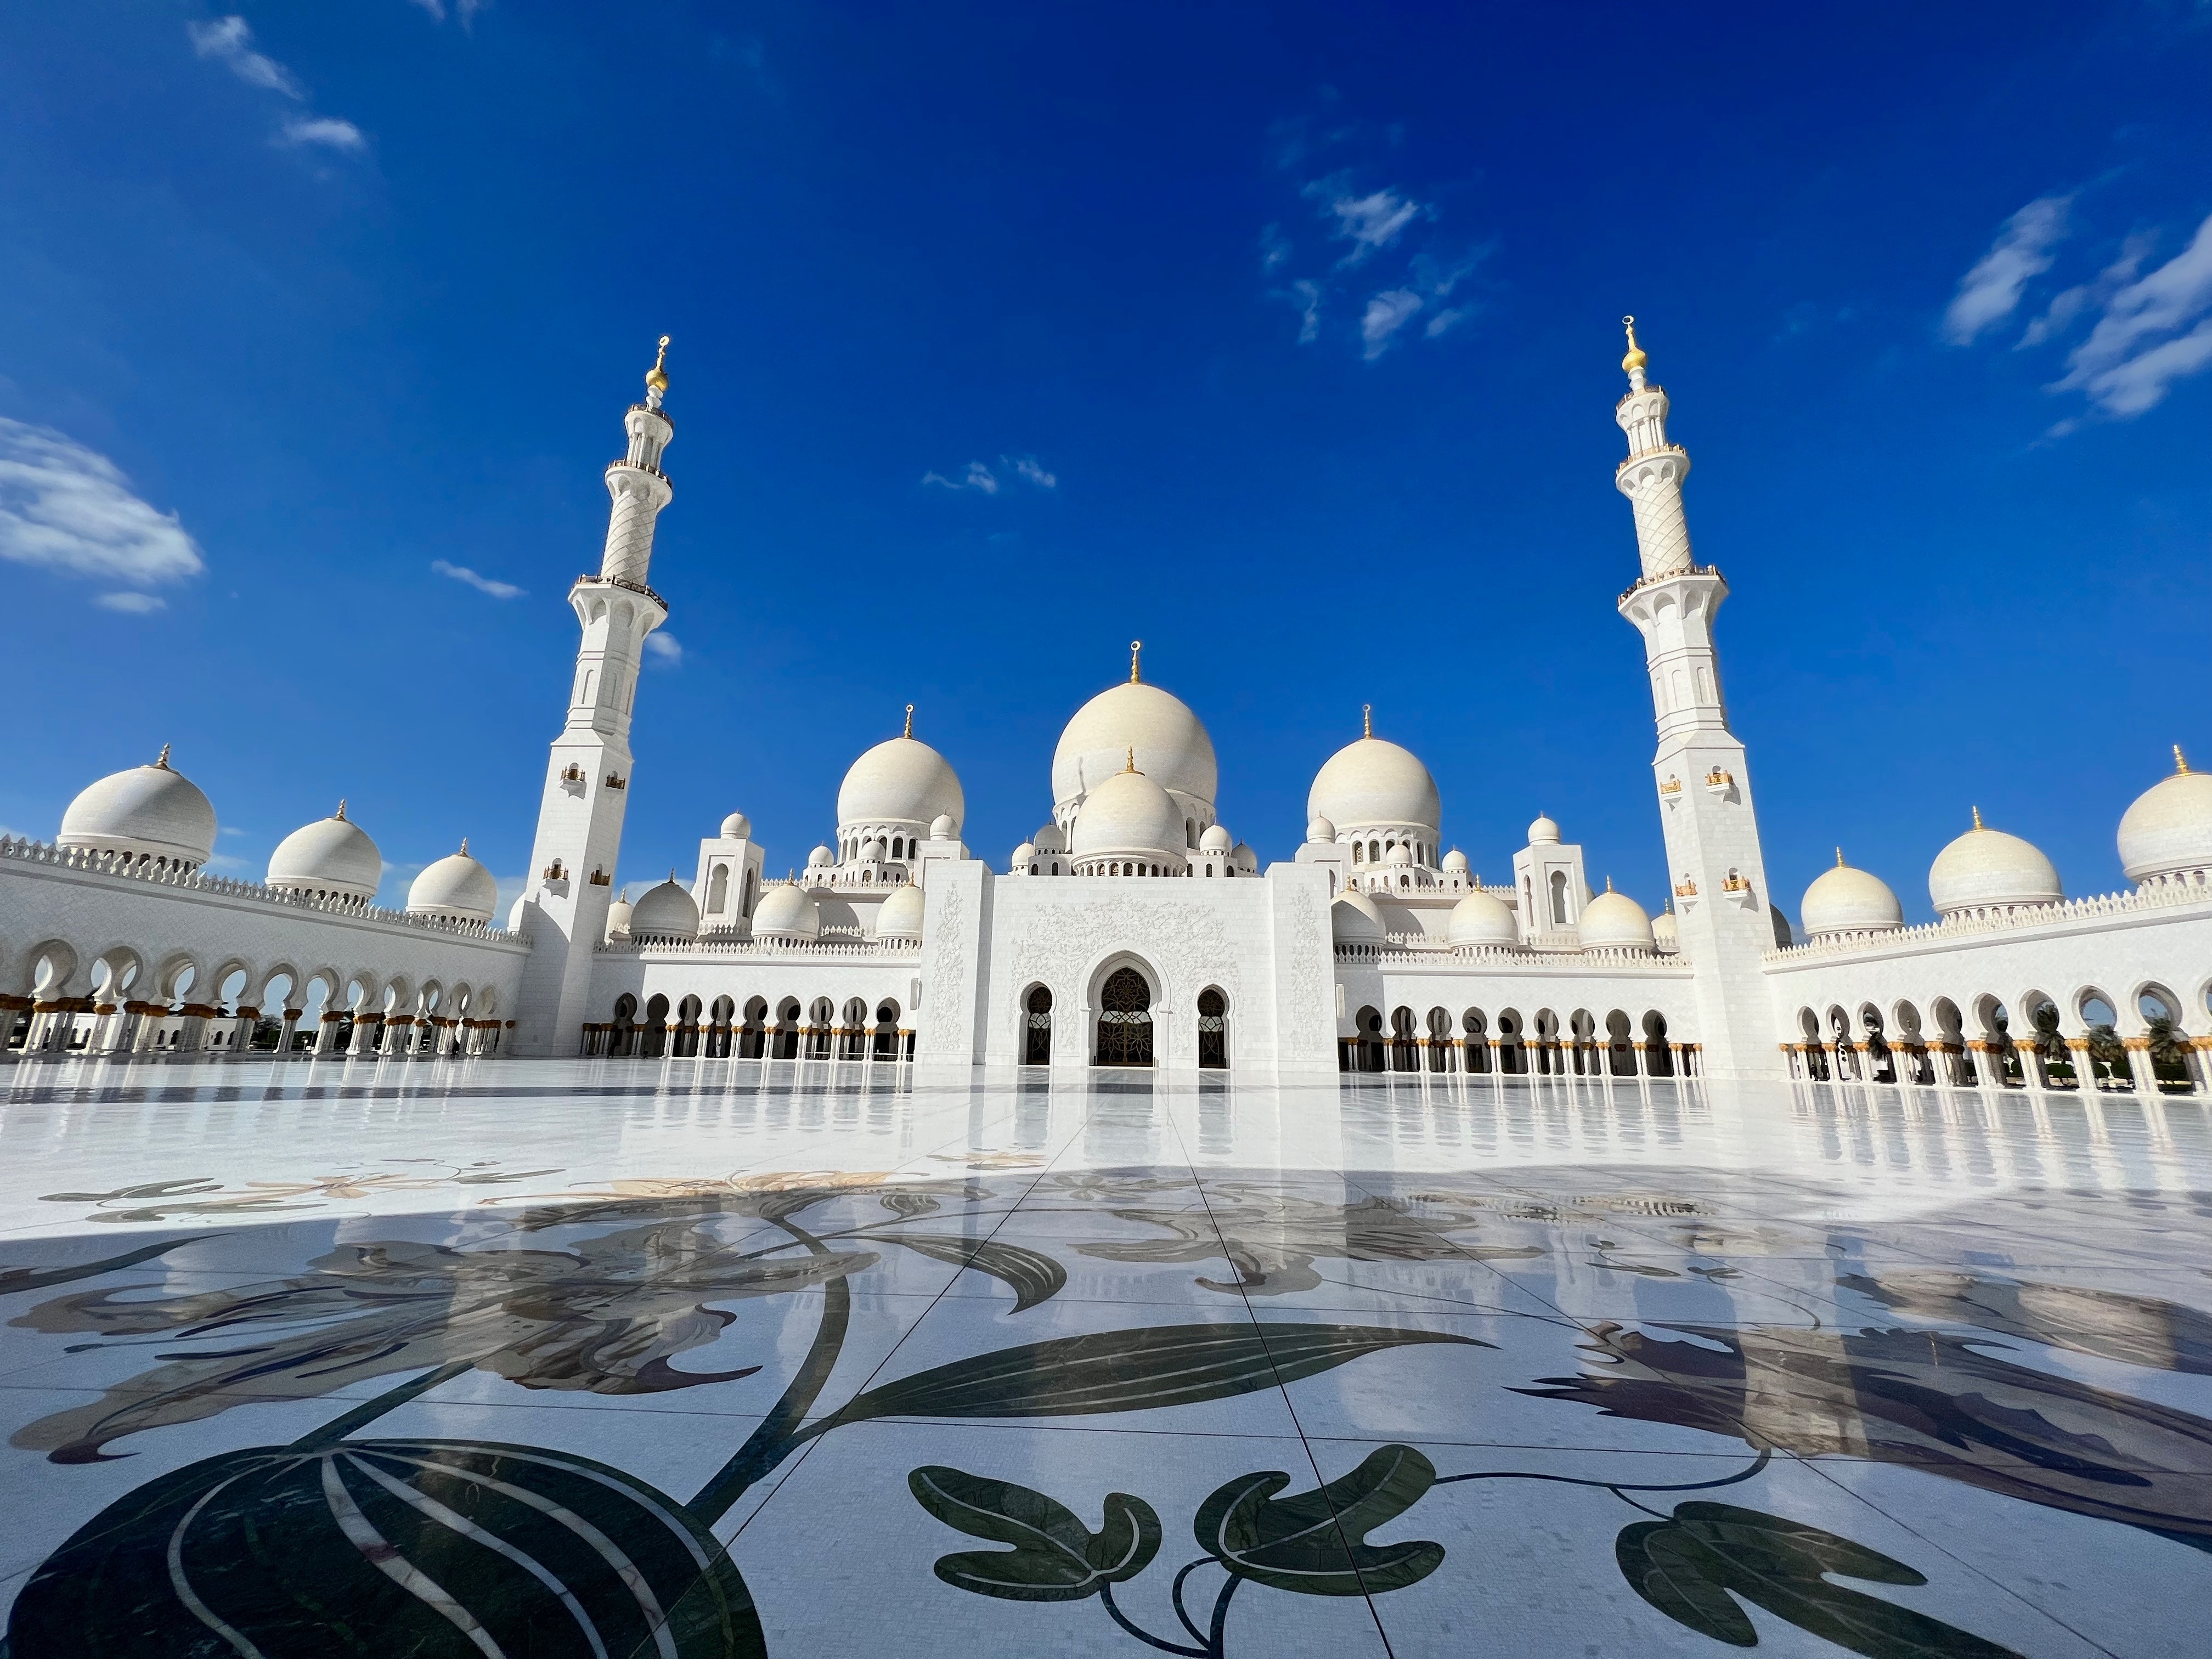 10 Fascinating Sheikh Zayed Grand Mosque Facts | Islamic Landmarks